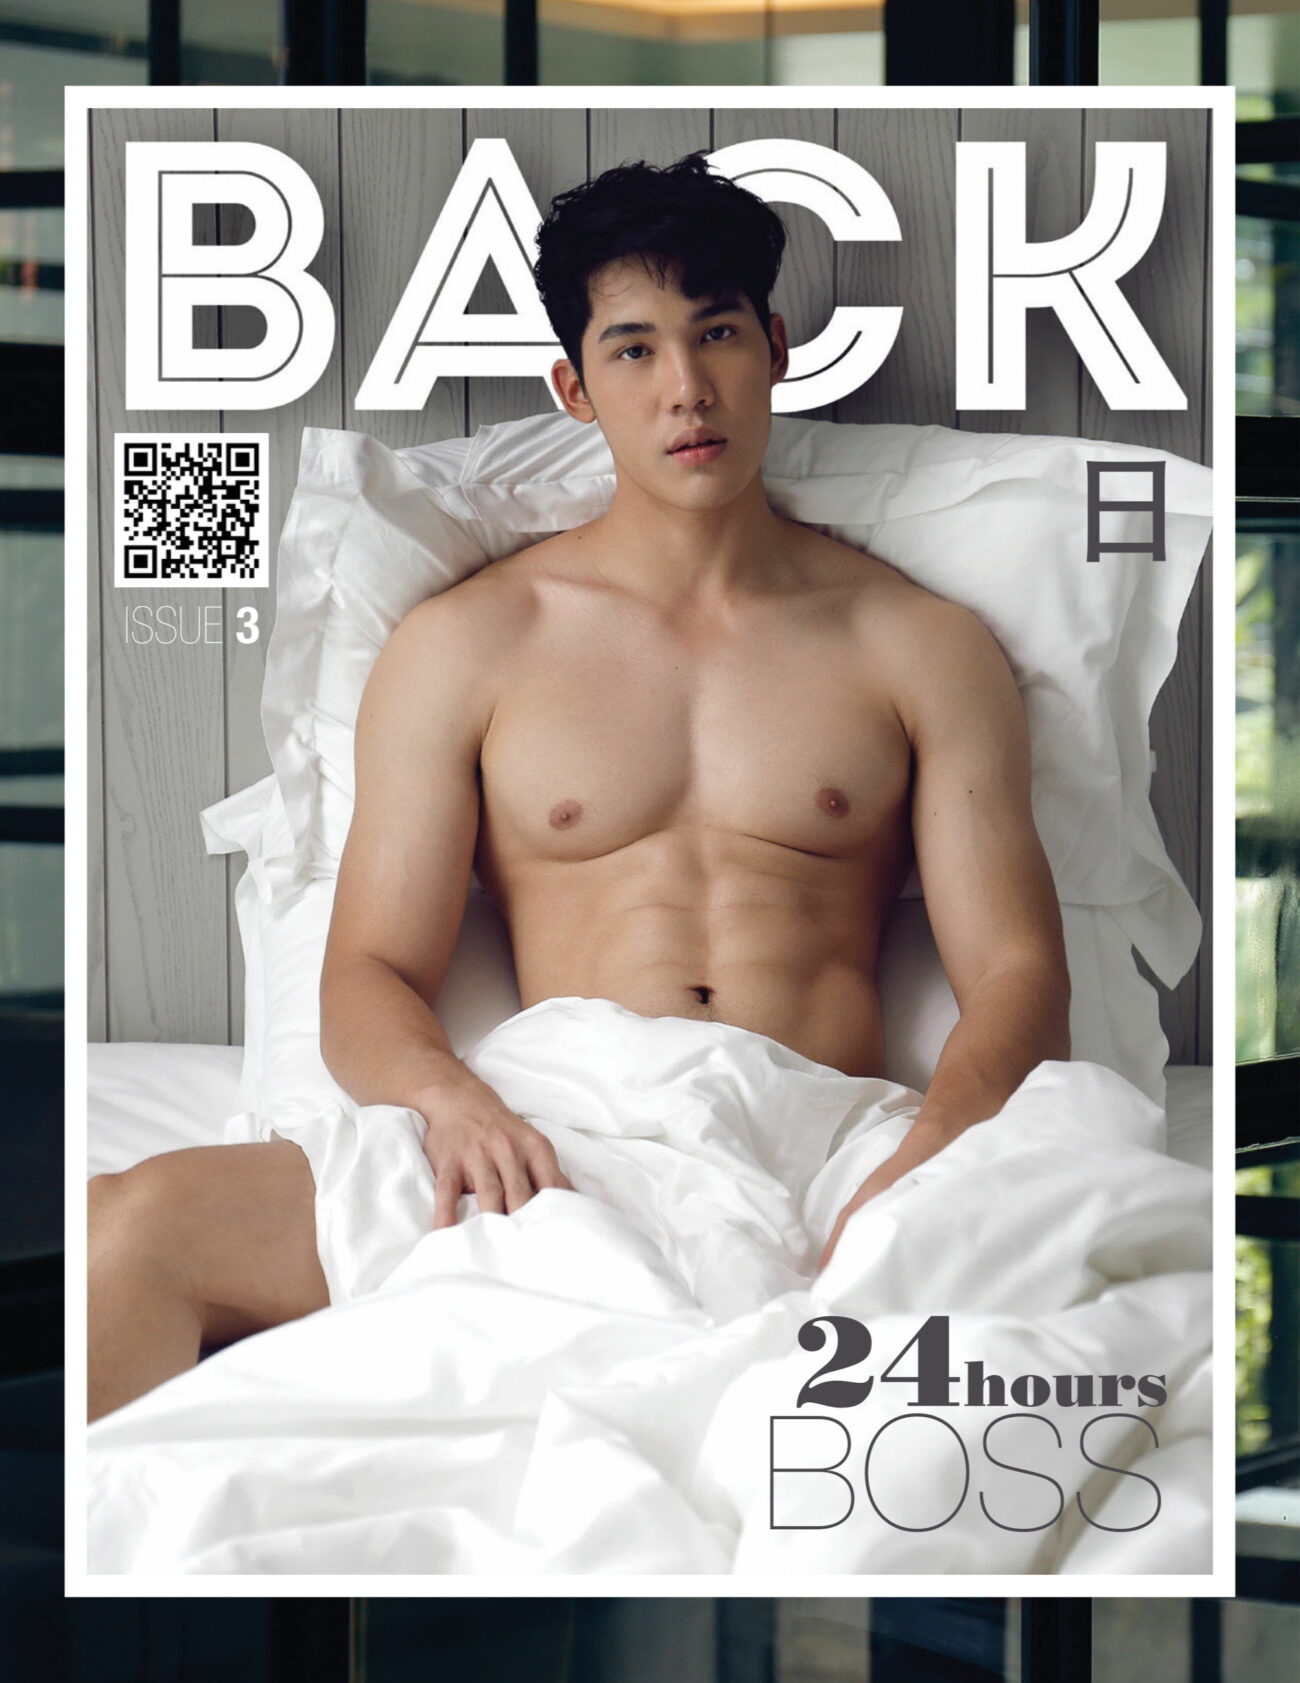 BACK Magazine issue.03 24 Hours BOSS ‖ 18+【PHOTO+VIDEO】